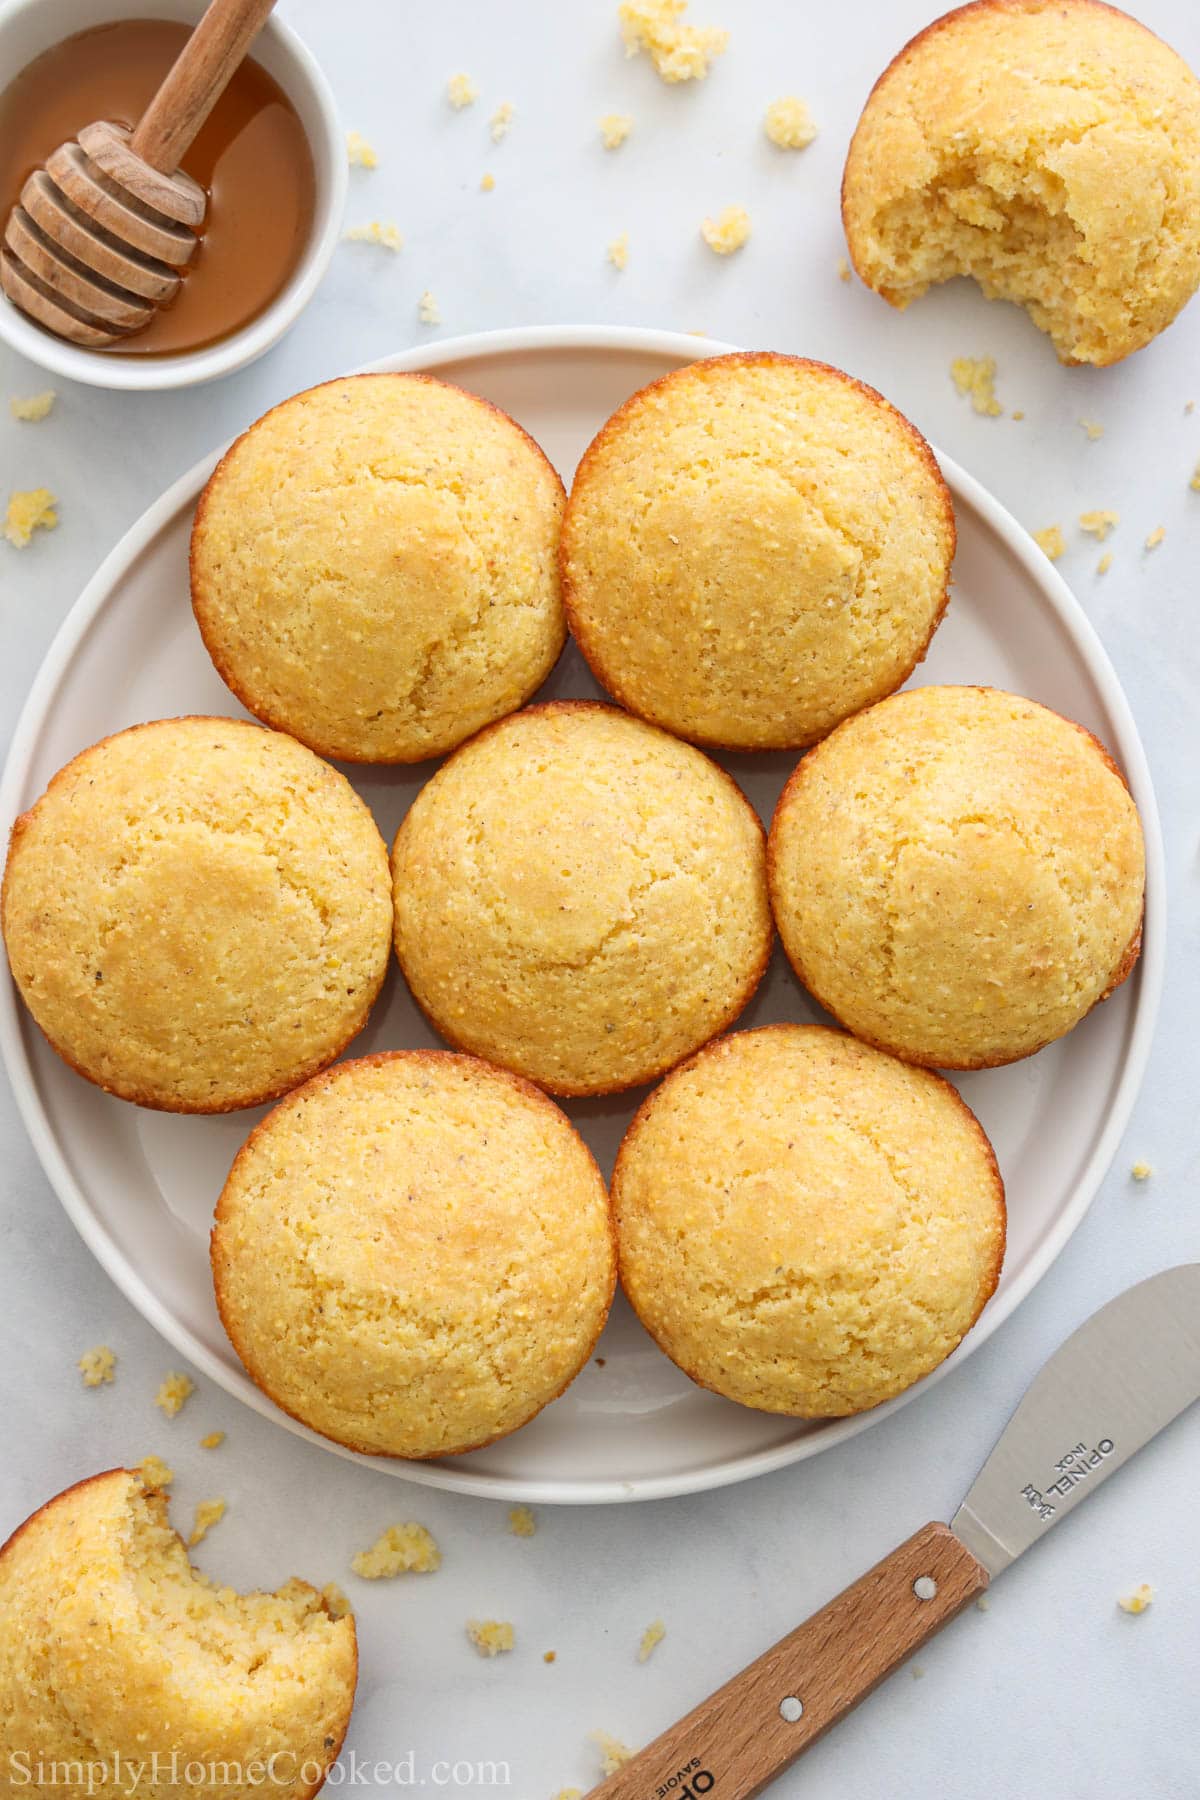 Vertical image of Cornbread Muffins on a white plate with honey and a knife nearby